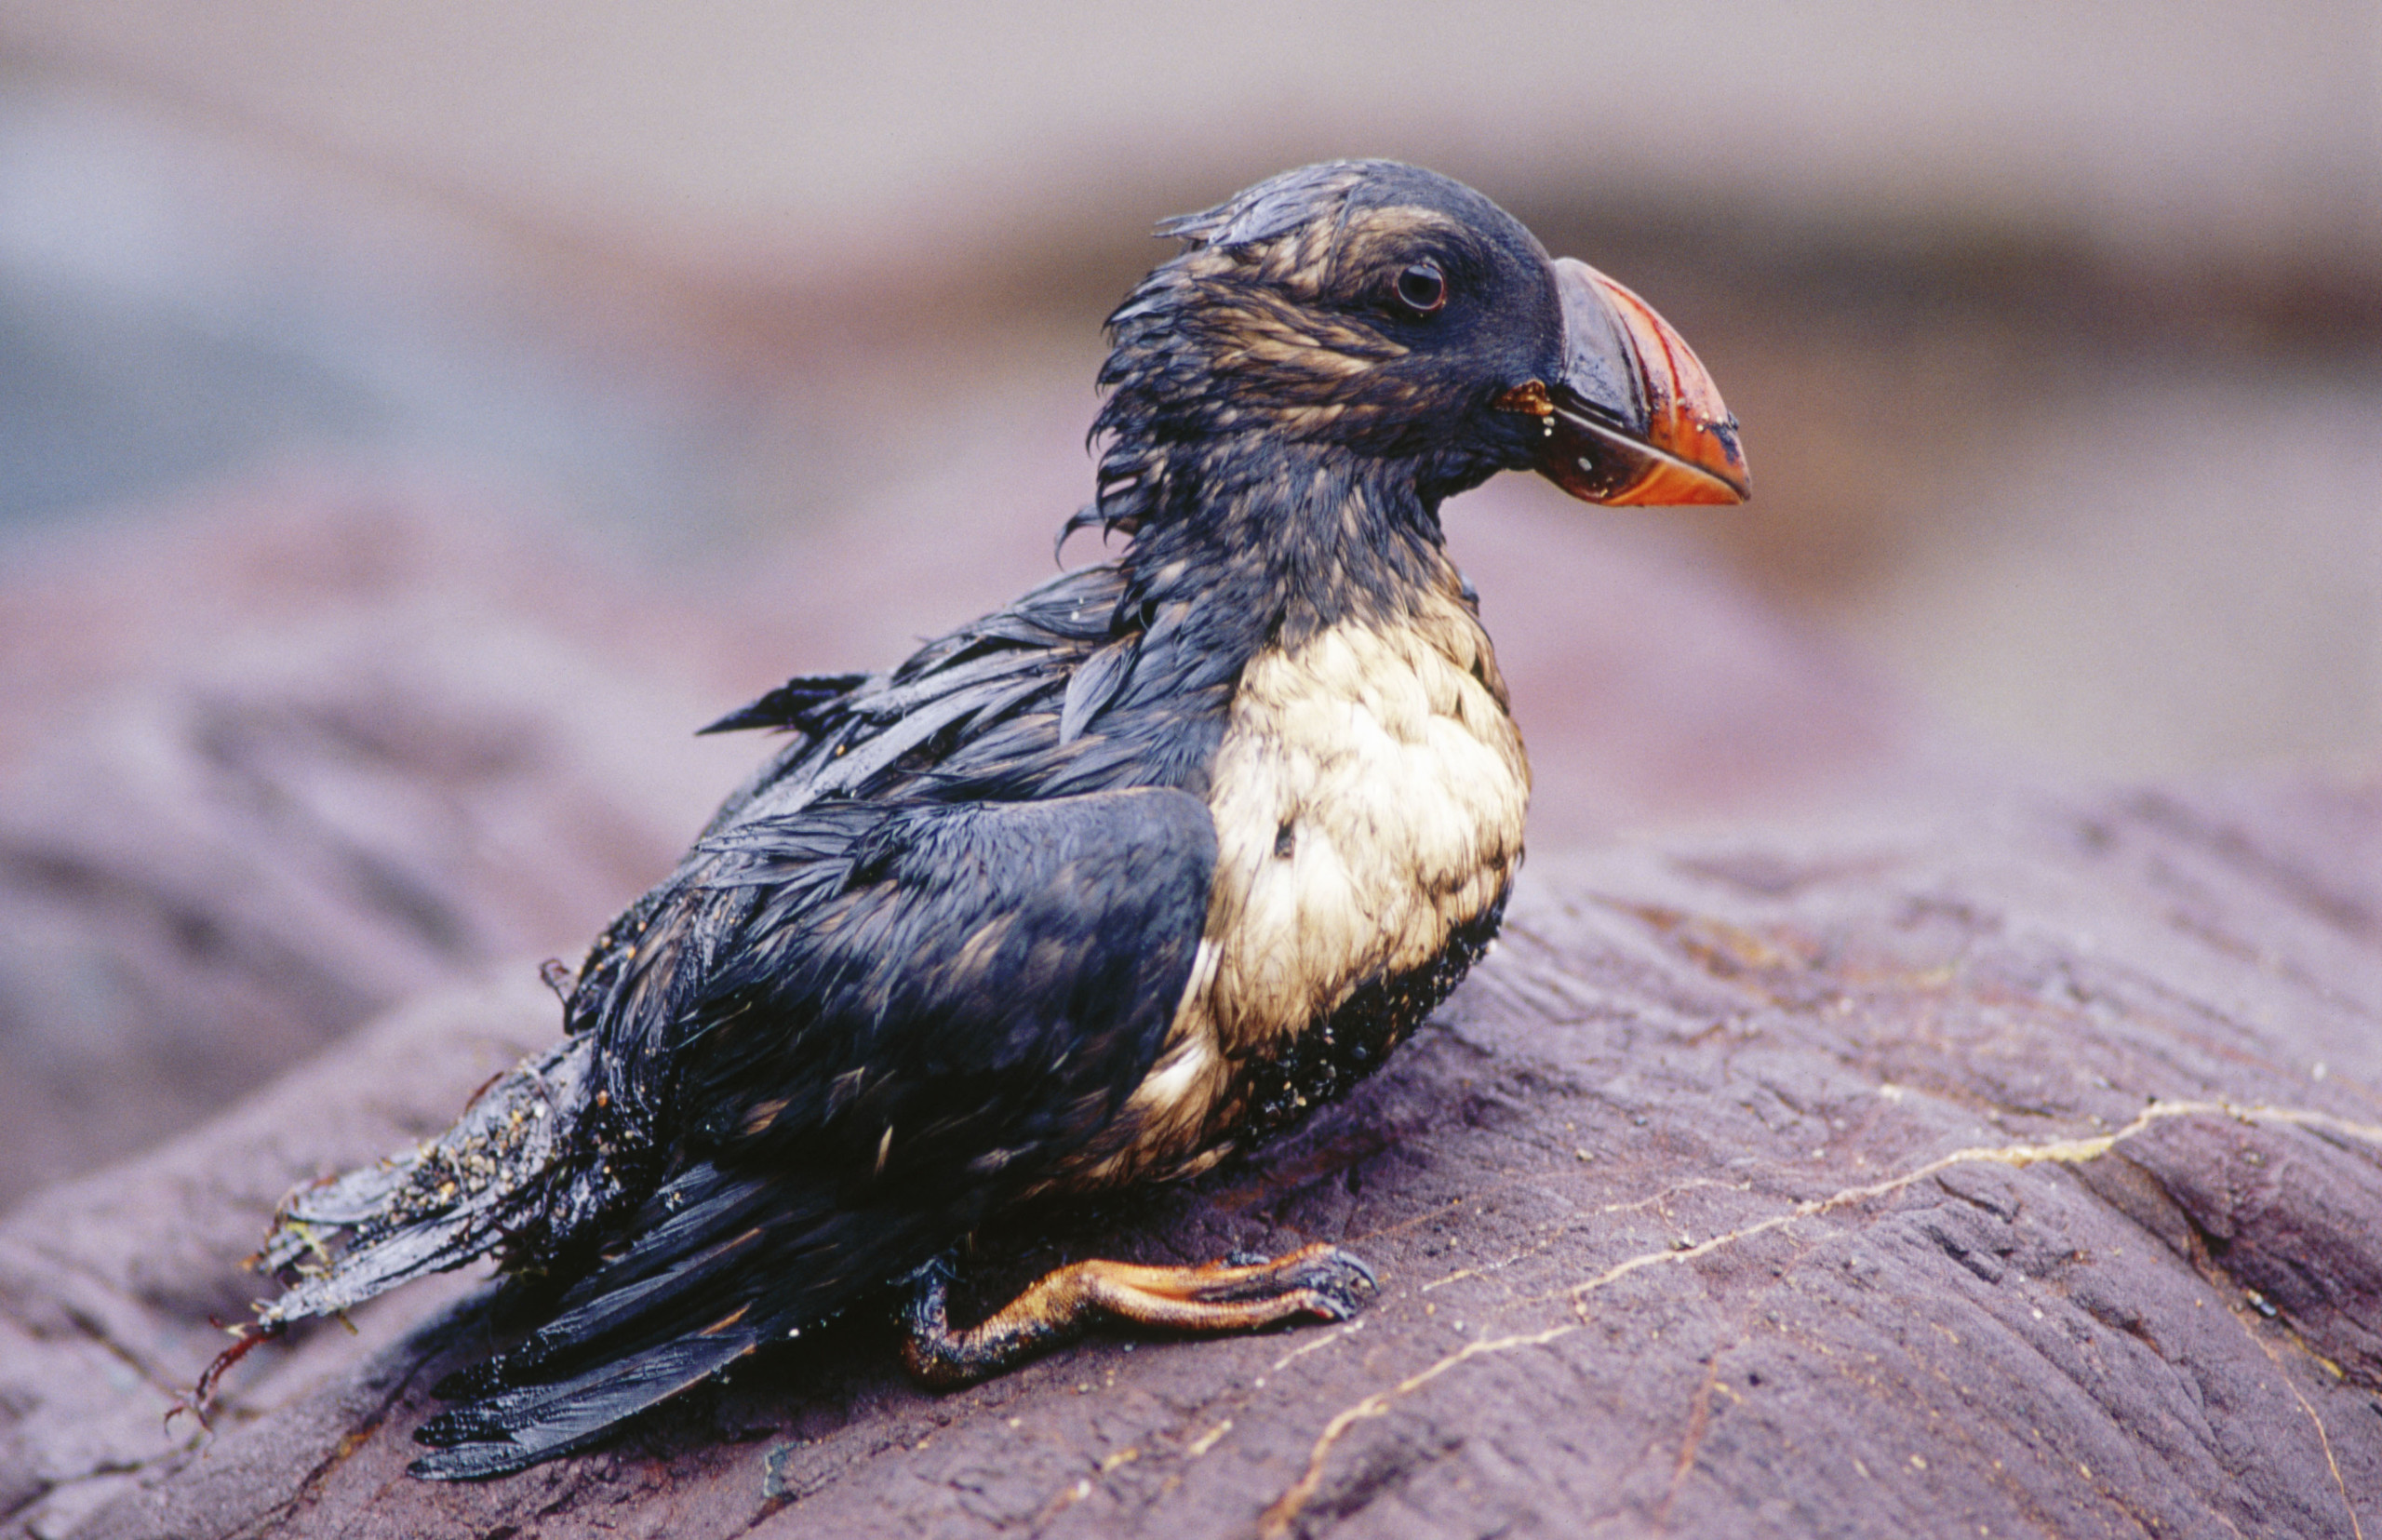 Atlantic Puffin (Fratercula arctica) after the fuel spill (´chapapote´) from tanker Prestige. Dec. 2002. Spain ©Alamy